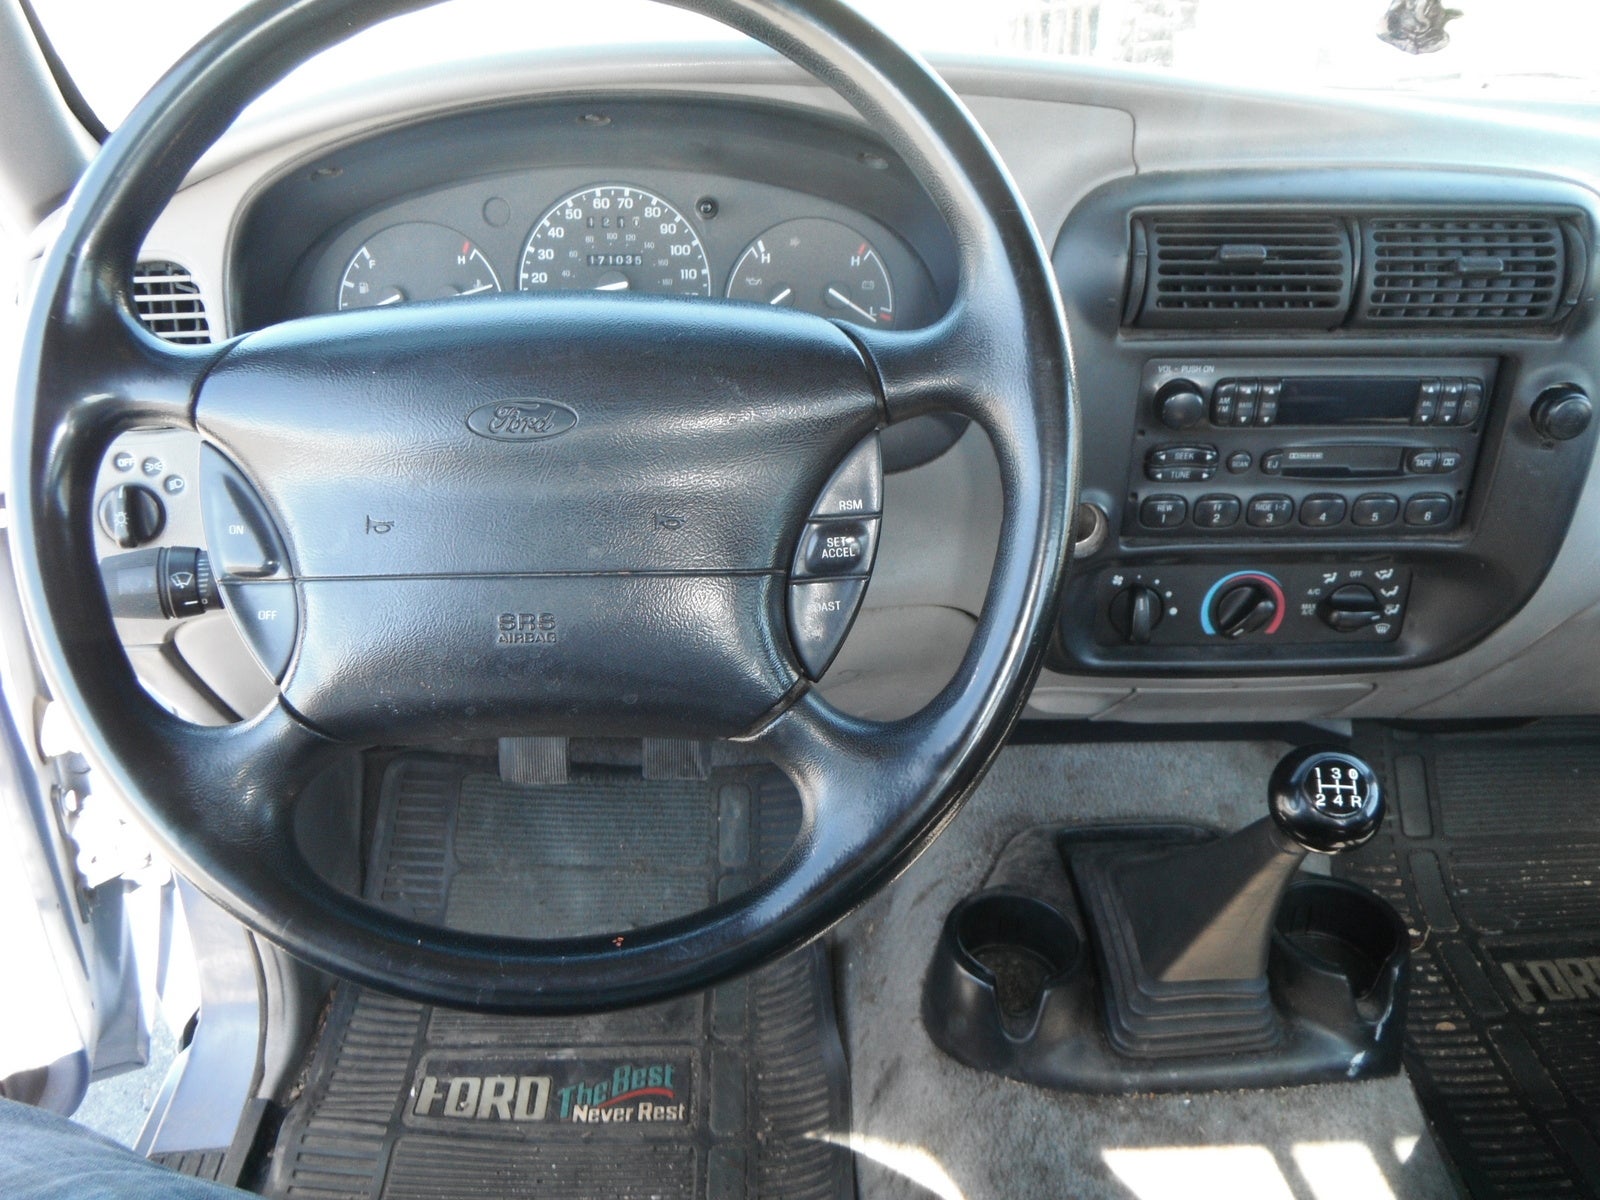 1997 Ford ranger interior pictures #5